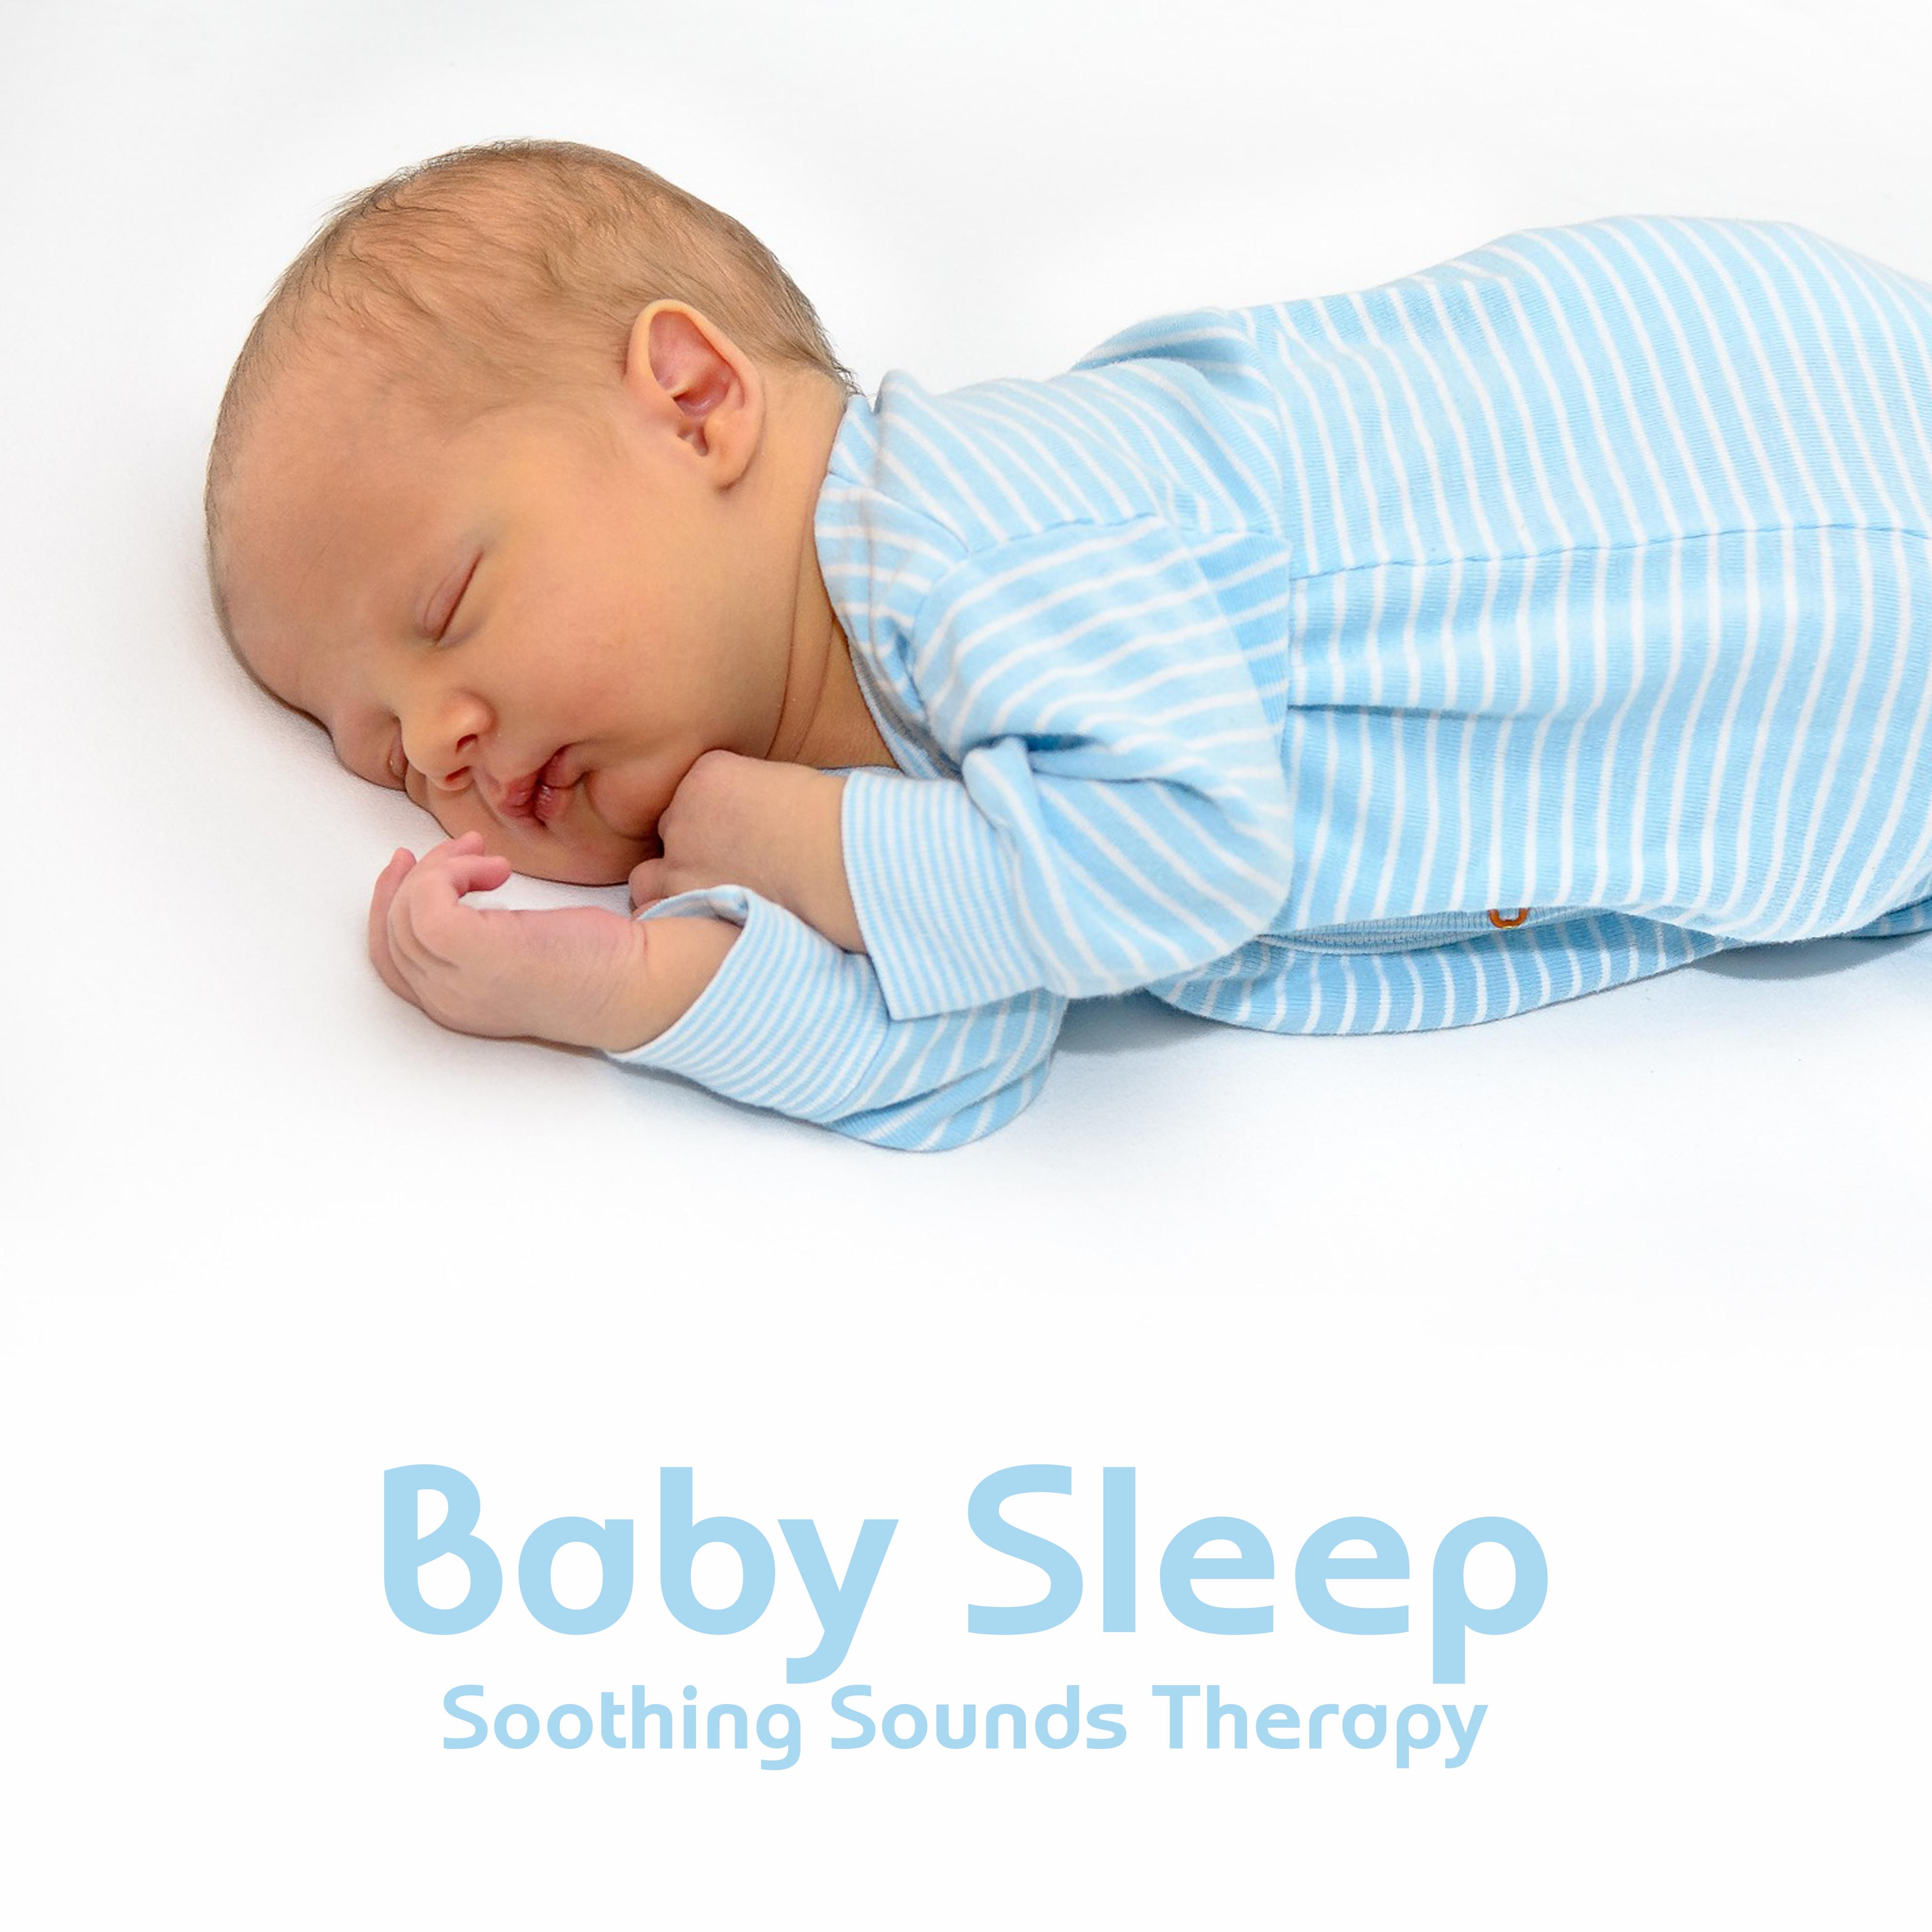 Baby Sleep Soothing Sounds Therapy: 15 New Age 2019 Soft Calming Songs for Babies, Stress Relief Music, Magical Moments of Restful Deep Sleep, Mom & Child Nap Time